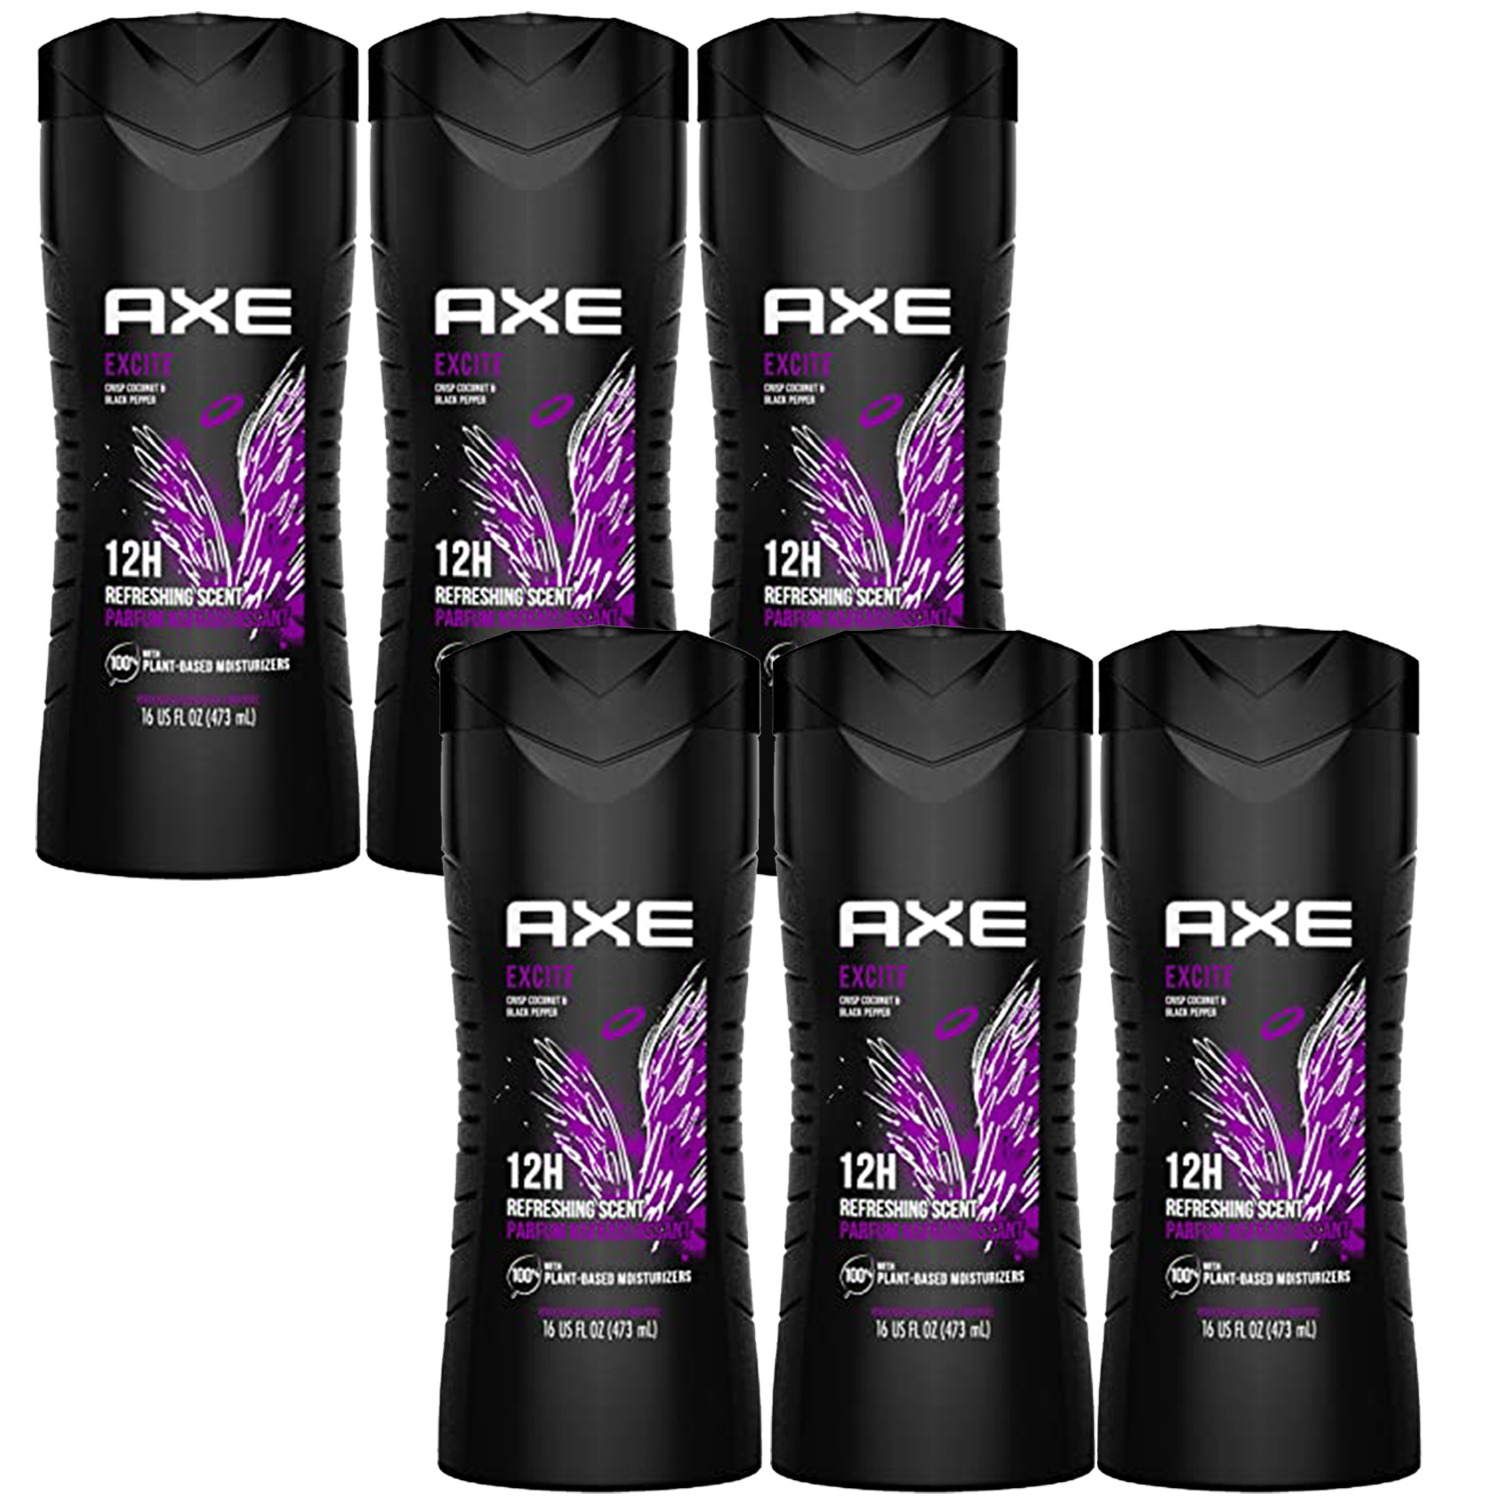 6-New AXE Body Wash 12h Refreshing Scent Excite Crisp Coconut & Black Pepper wit